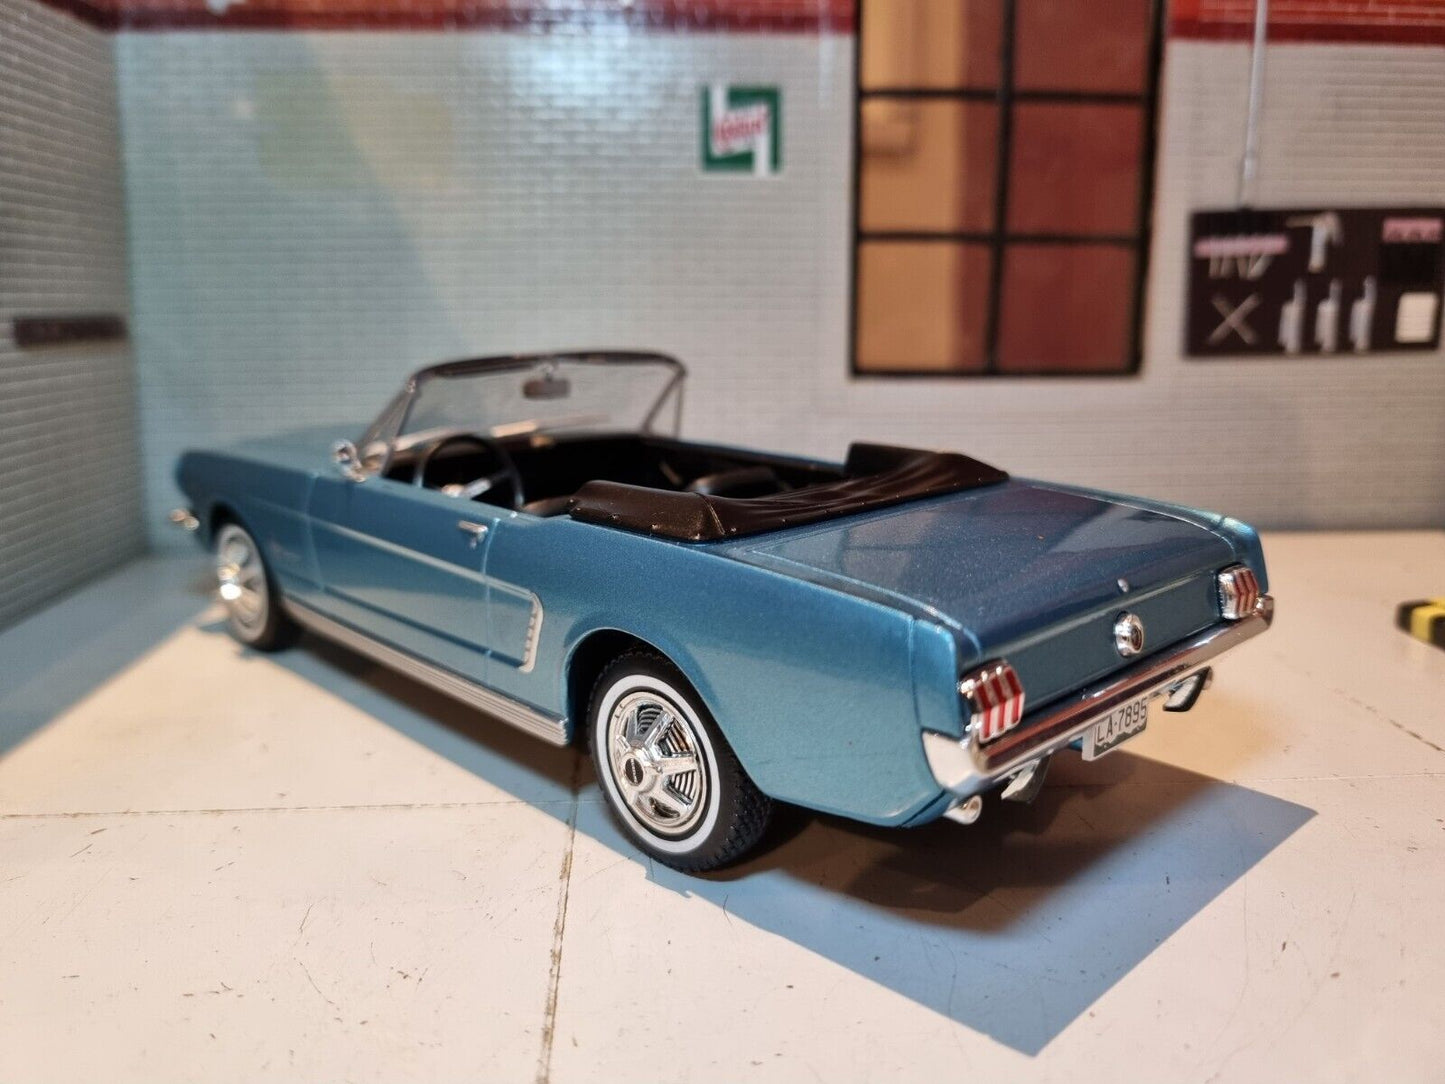 Ford 1964 Mustang Cabriolet 124119 Whitebox 1:24